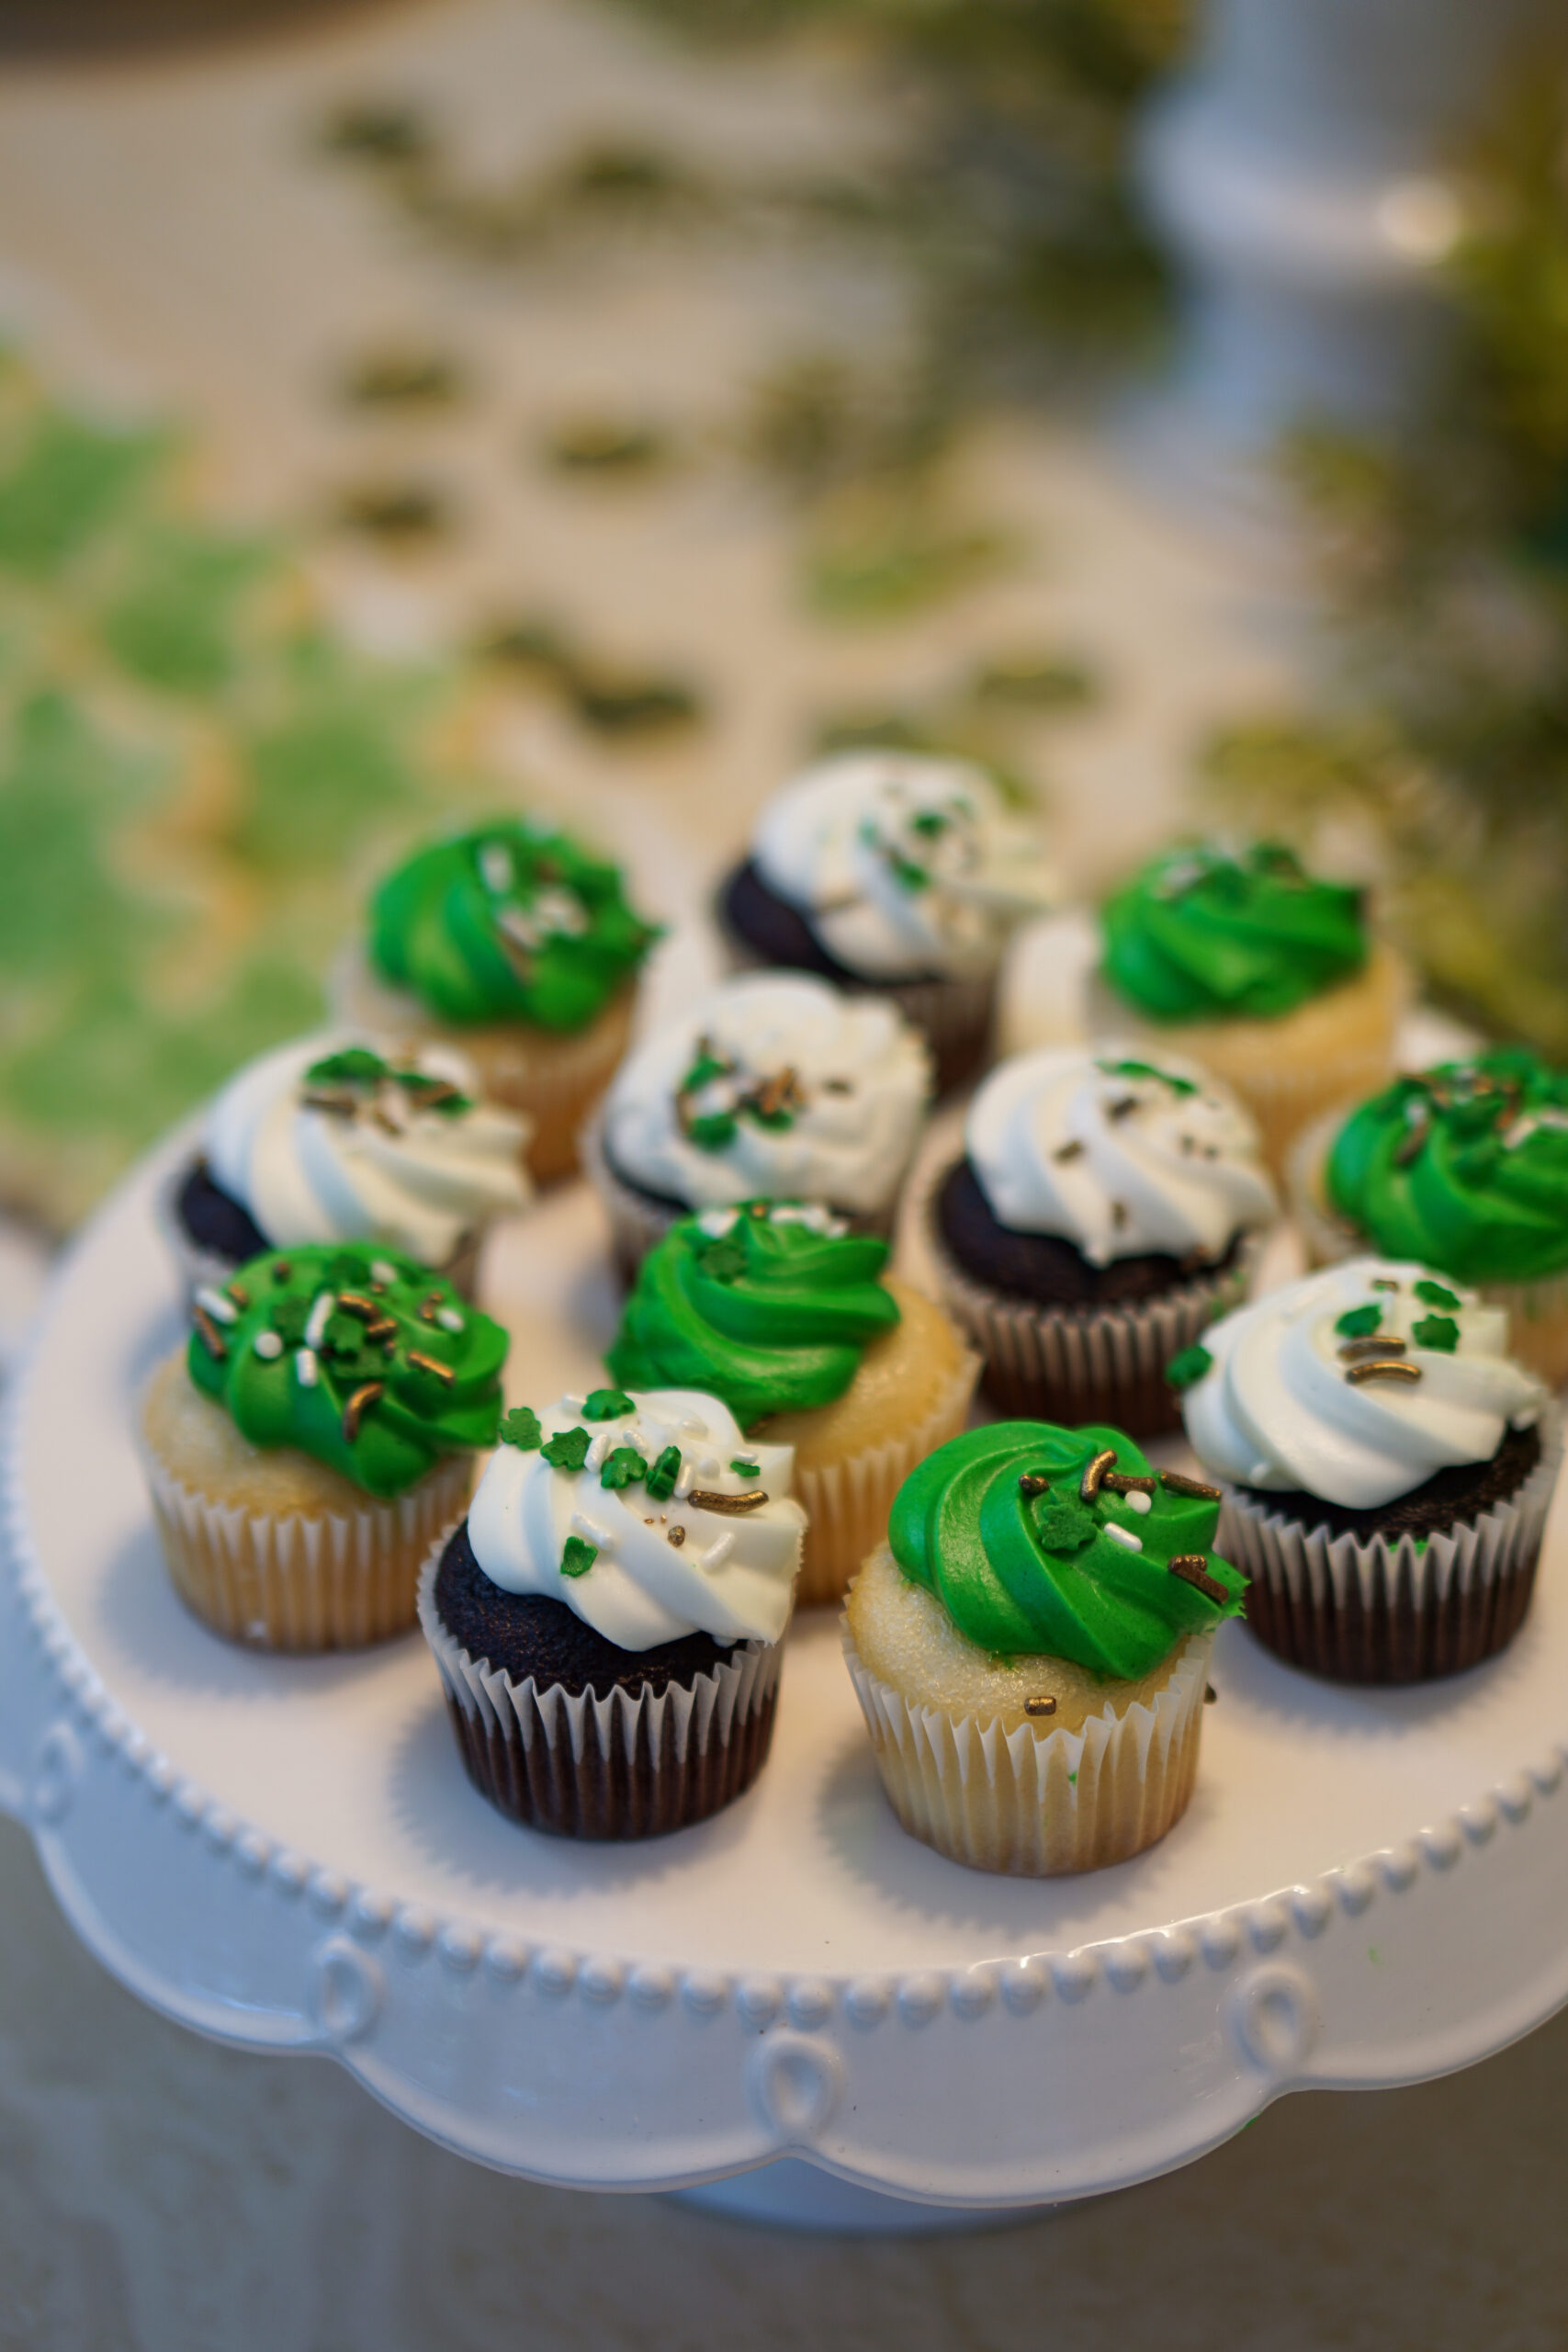 The Ultimate St. Patrick's Day Entertaining Guide